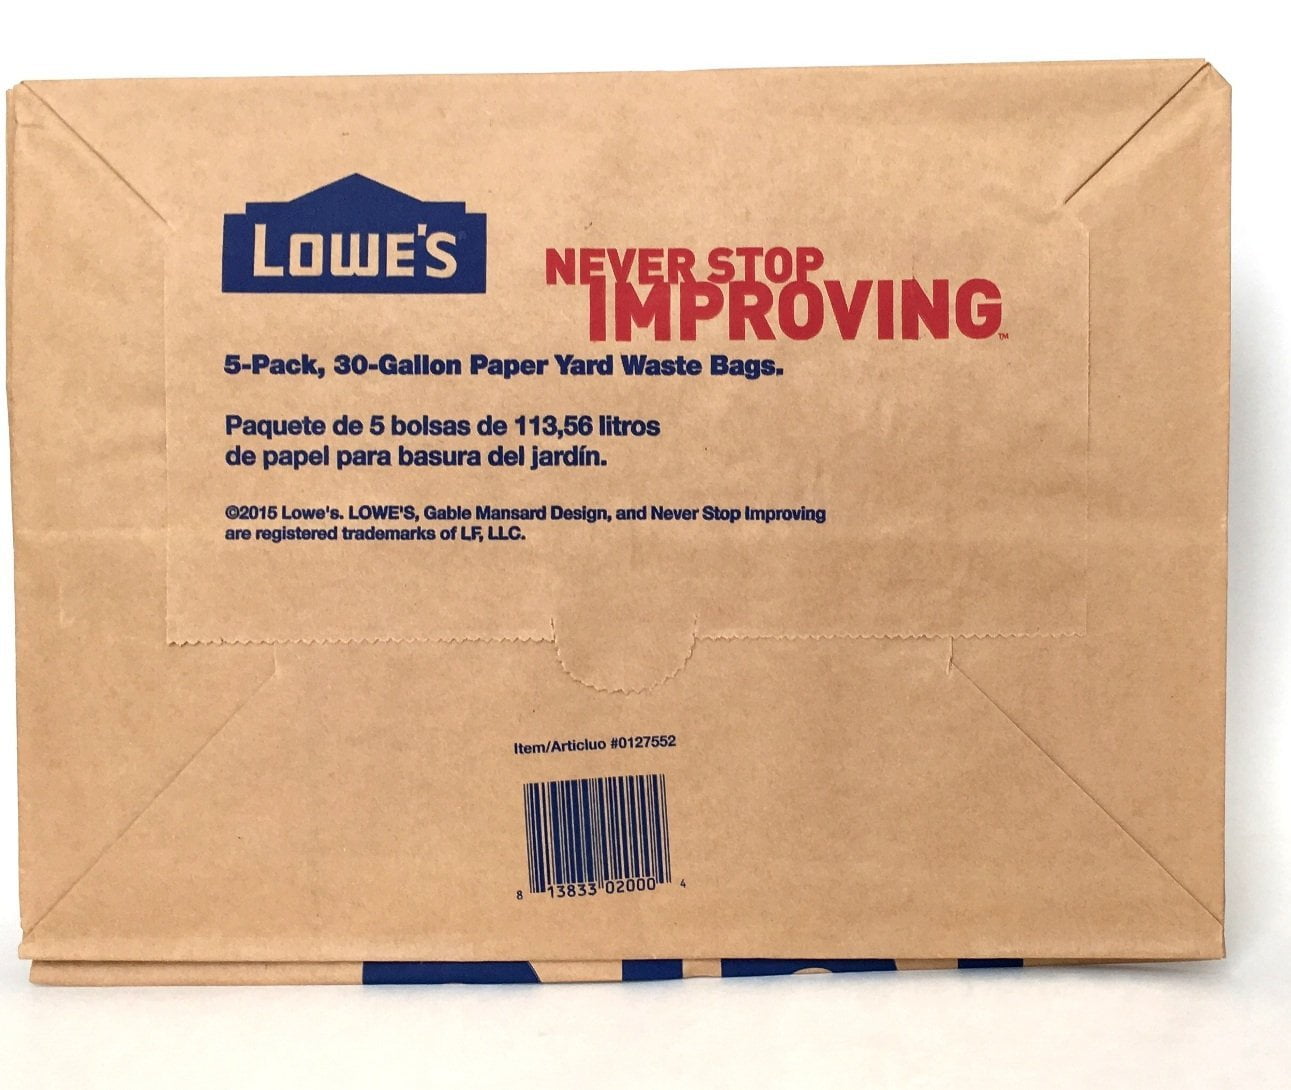 Lowes LF Lowes 30 Gallon Paper Lawn Leaf Trash Bags (10 Bags), Lava Heavy Duty Gardening Hand Soap for Yard Garden Clean Up and Cleaning Hands After